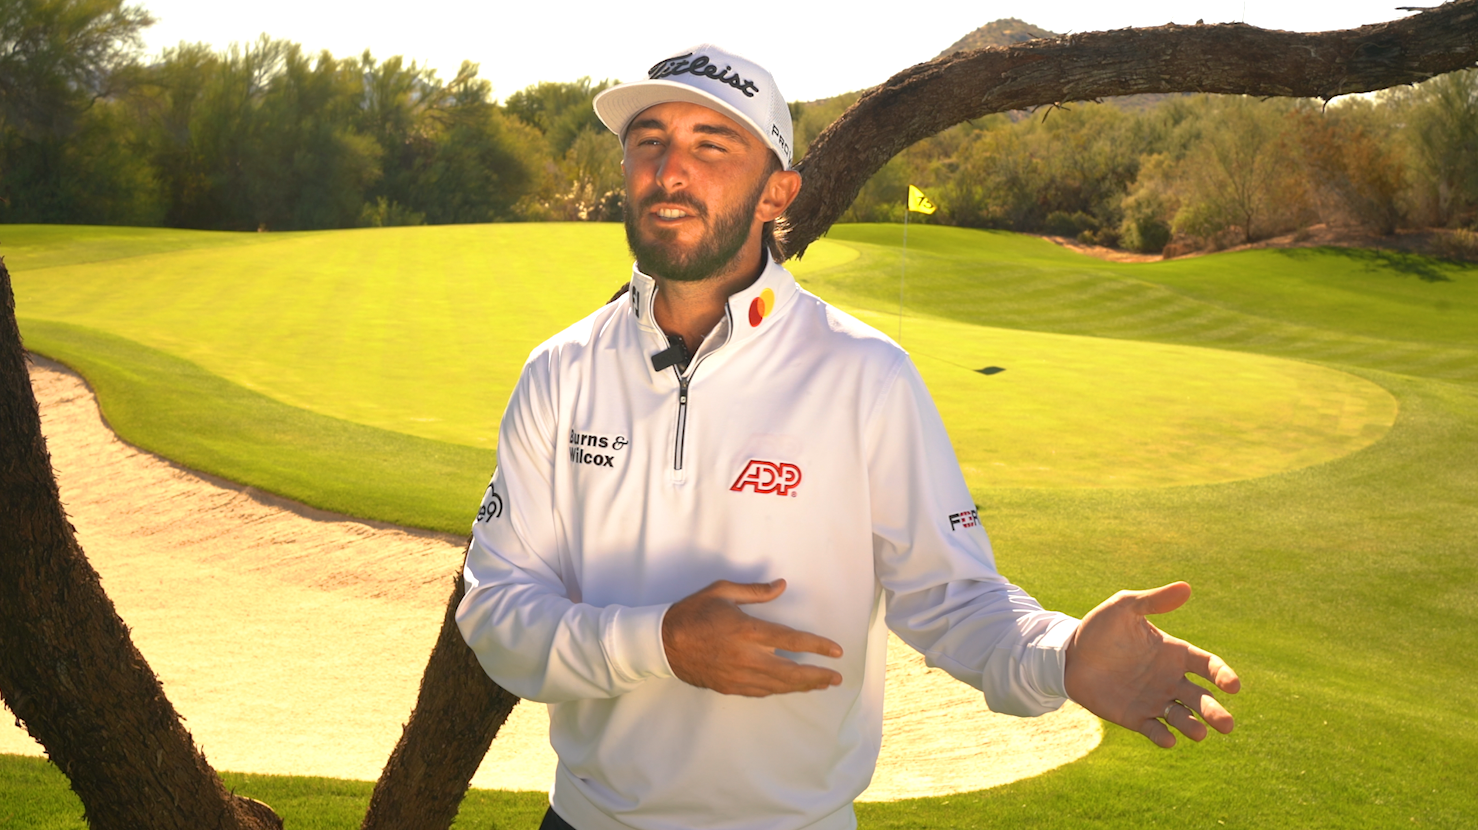 Some advice for all amateur golfers, from Max Homa